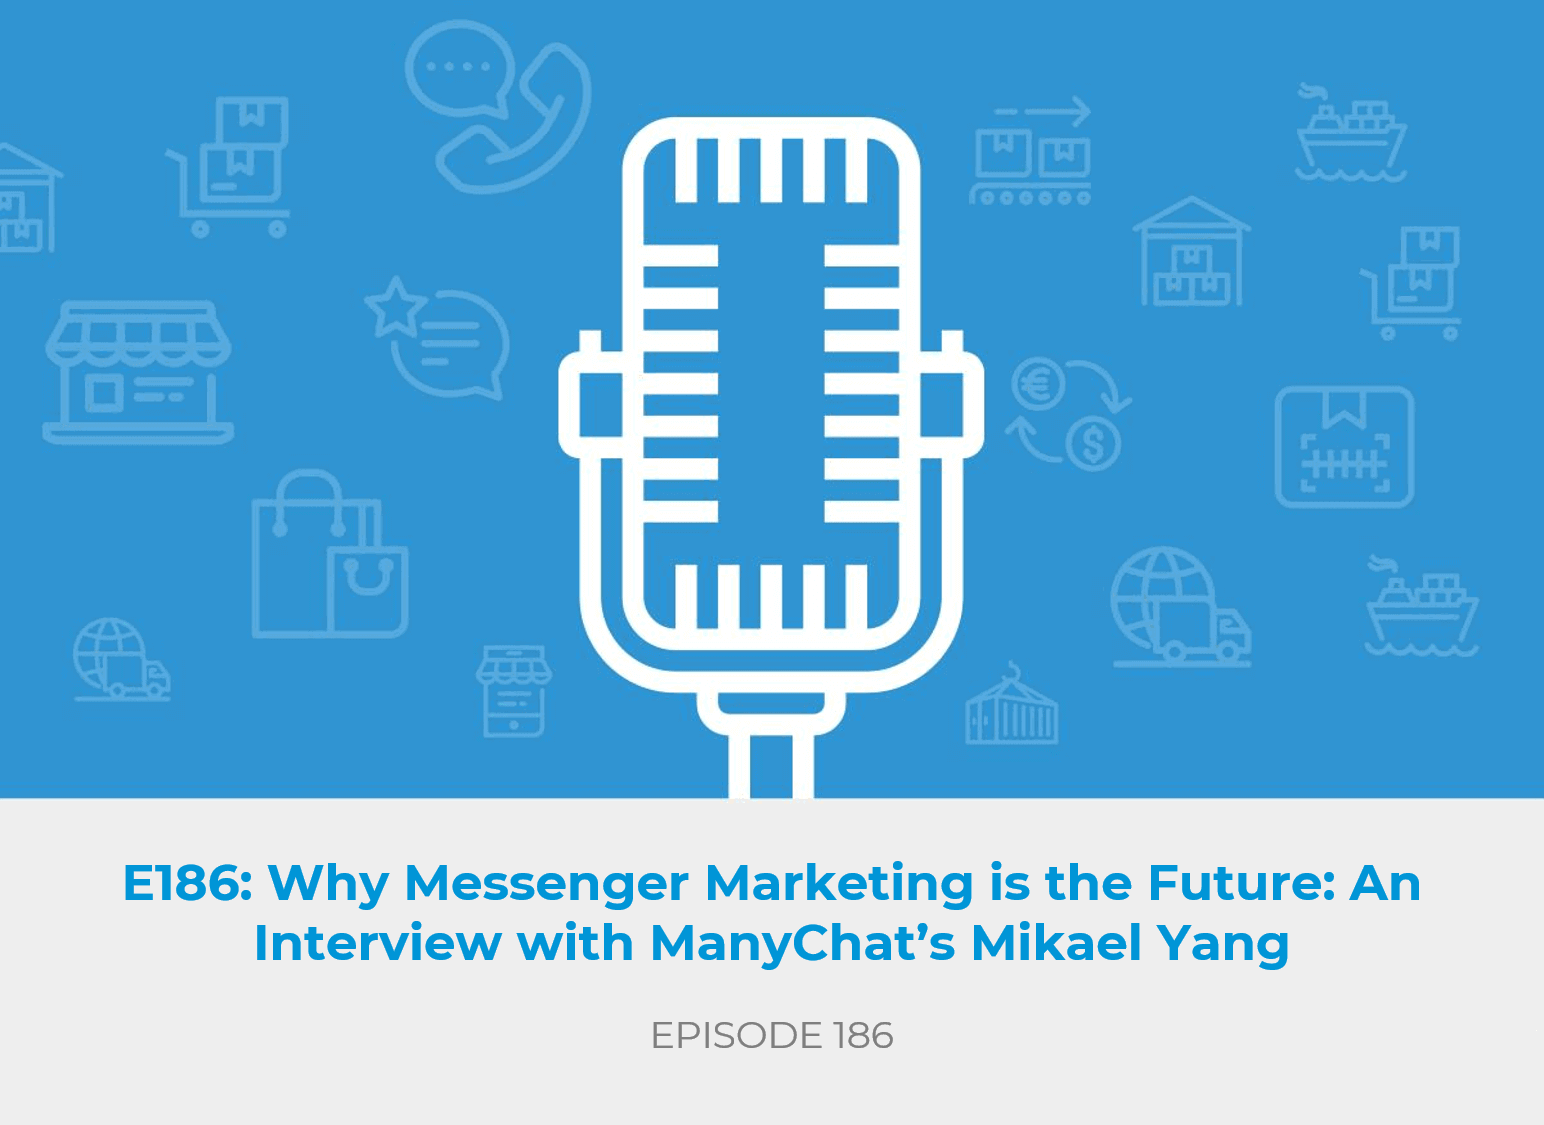 Why Messenger Marketing is the Future: An Interview with ManyChat’s Mikael Yang